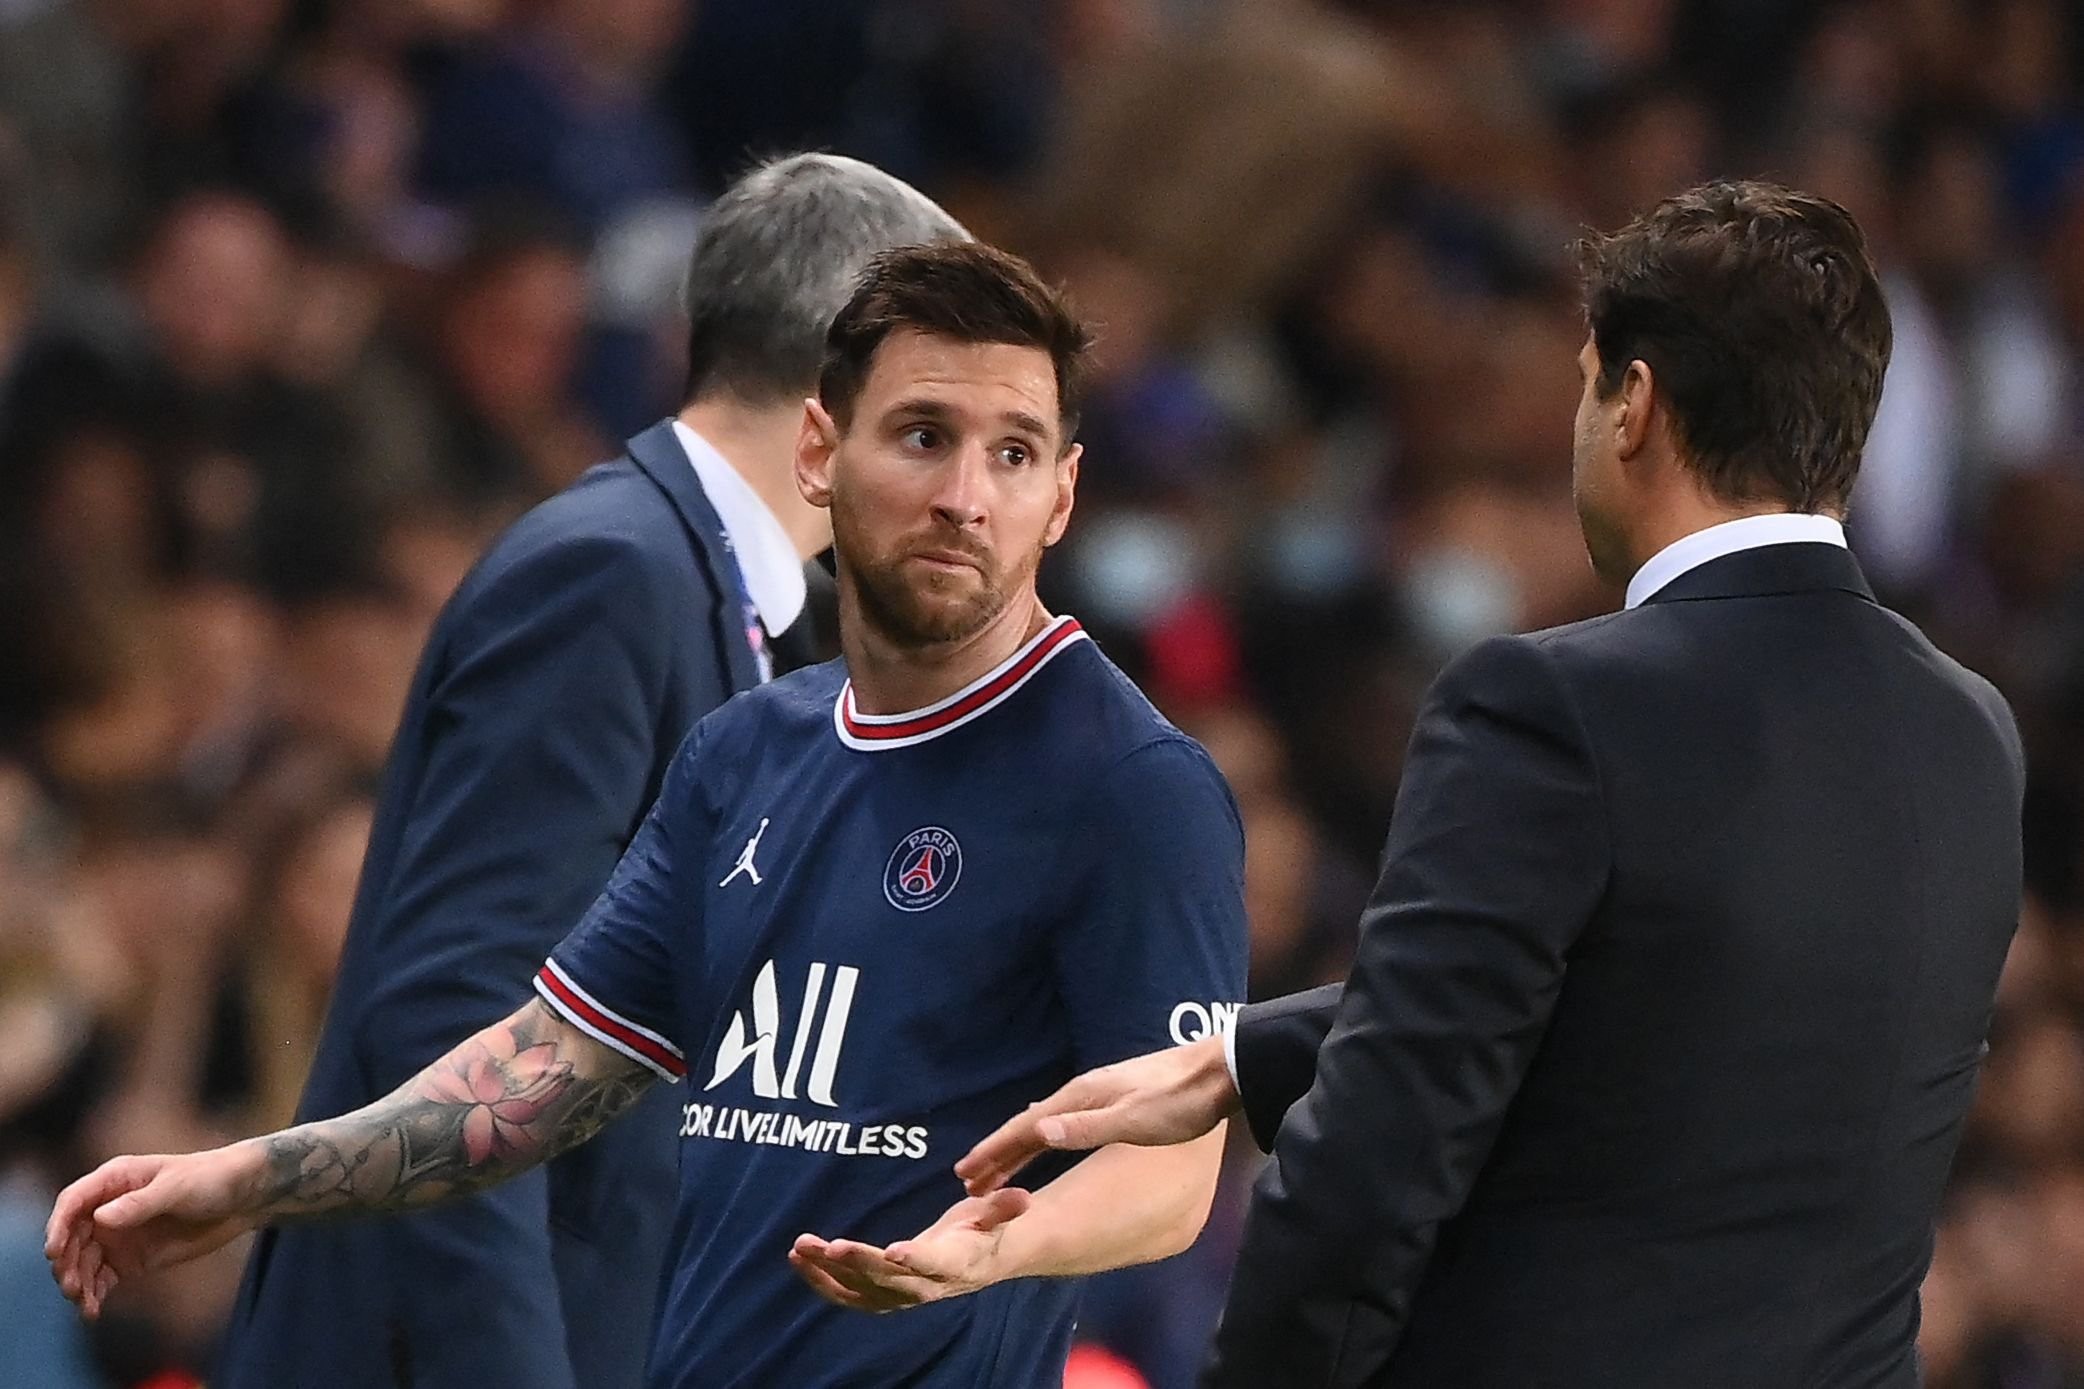 Mauricio Pochettino reveals what Lionel Messi told him after bemused reaction to PSG substitution